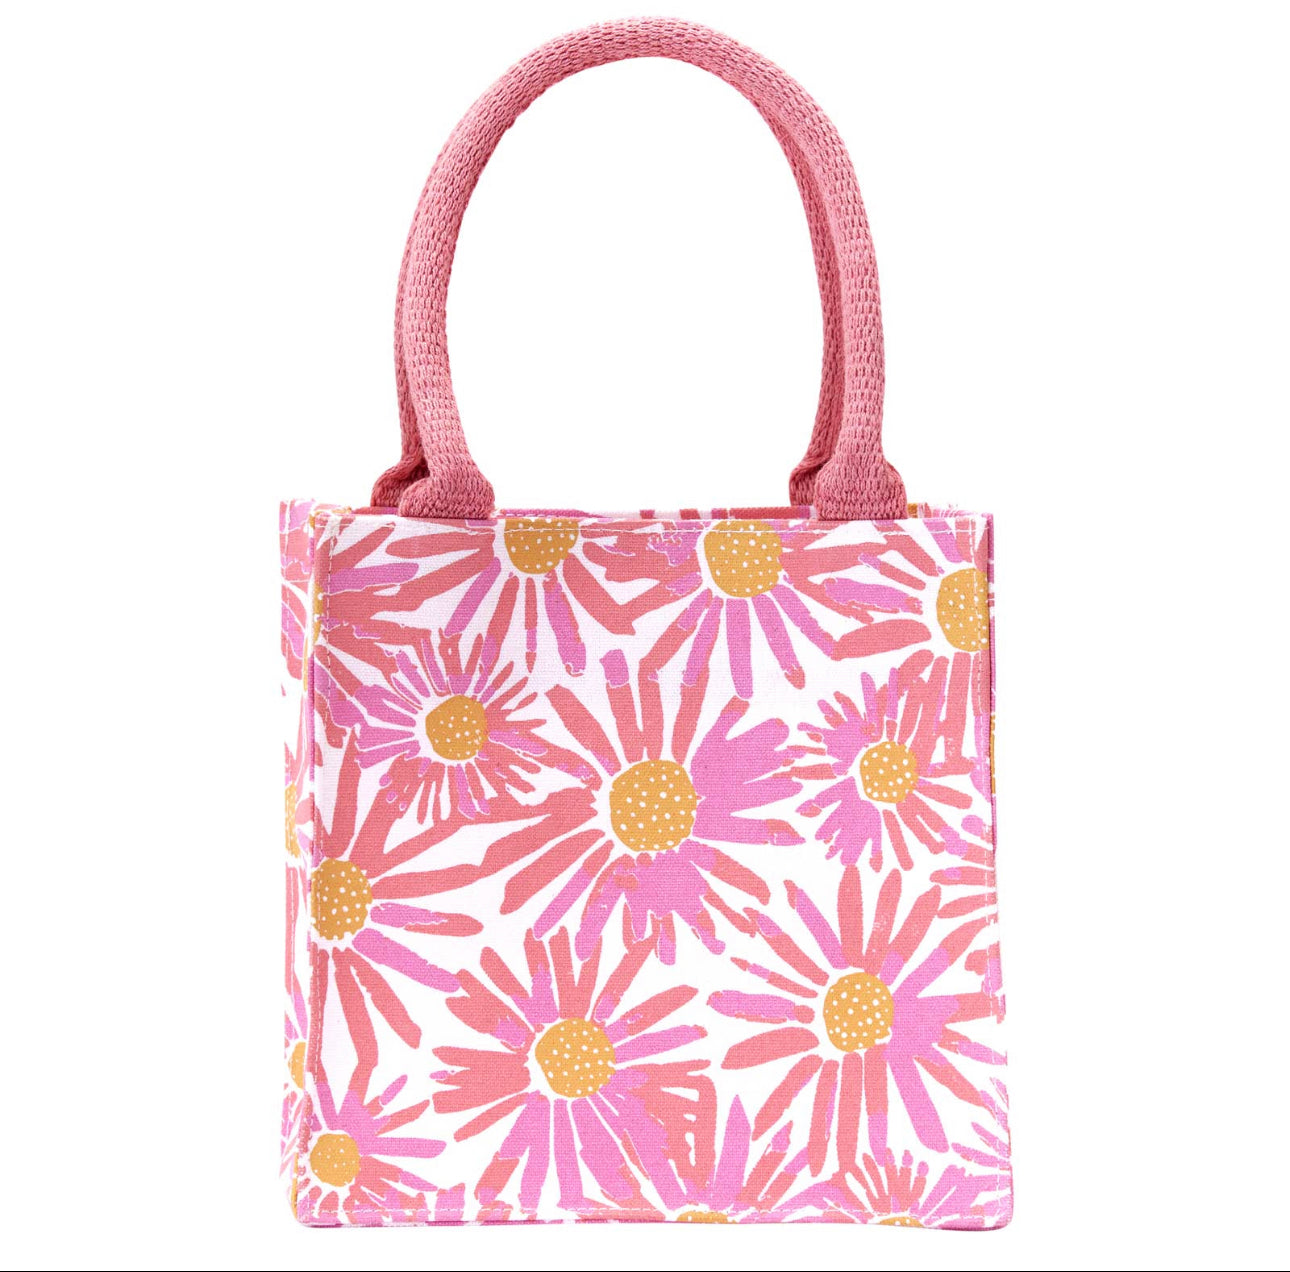 Reusable gift tote bags with fun designs - eco friendly gift wrapping